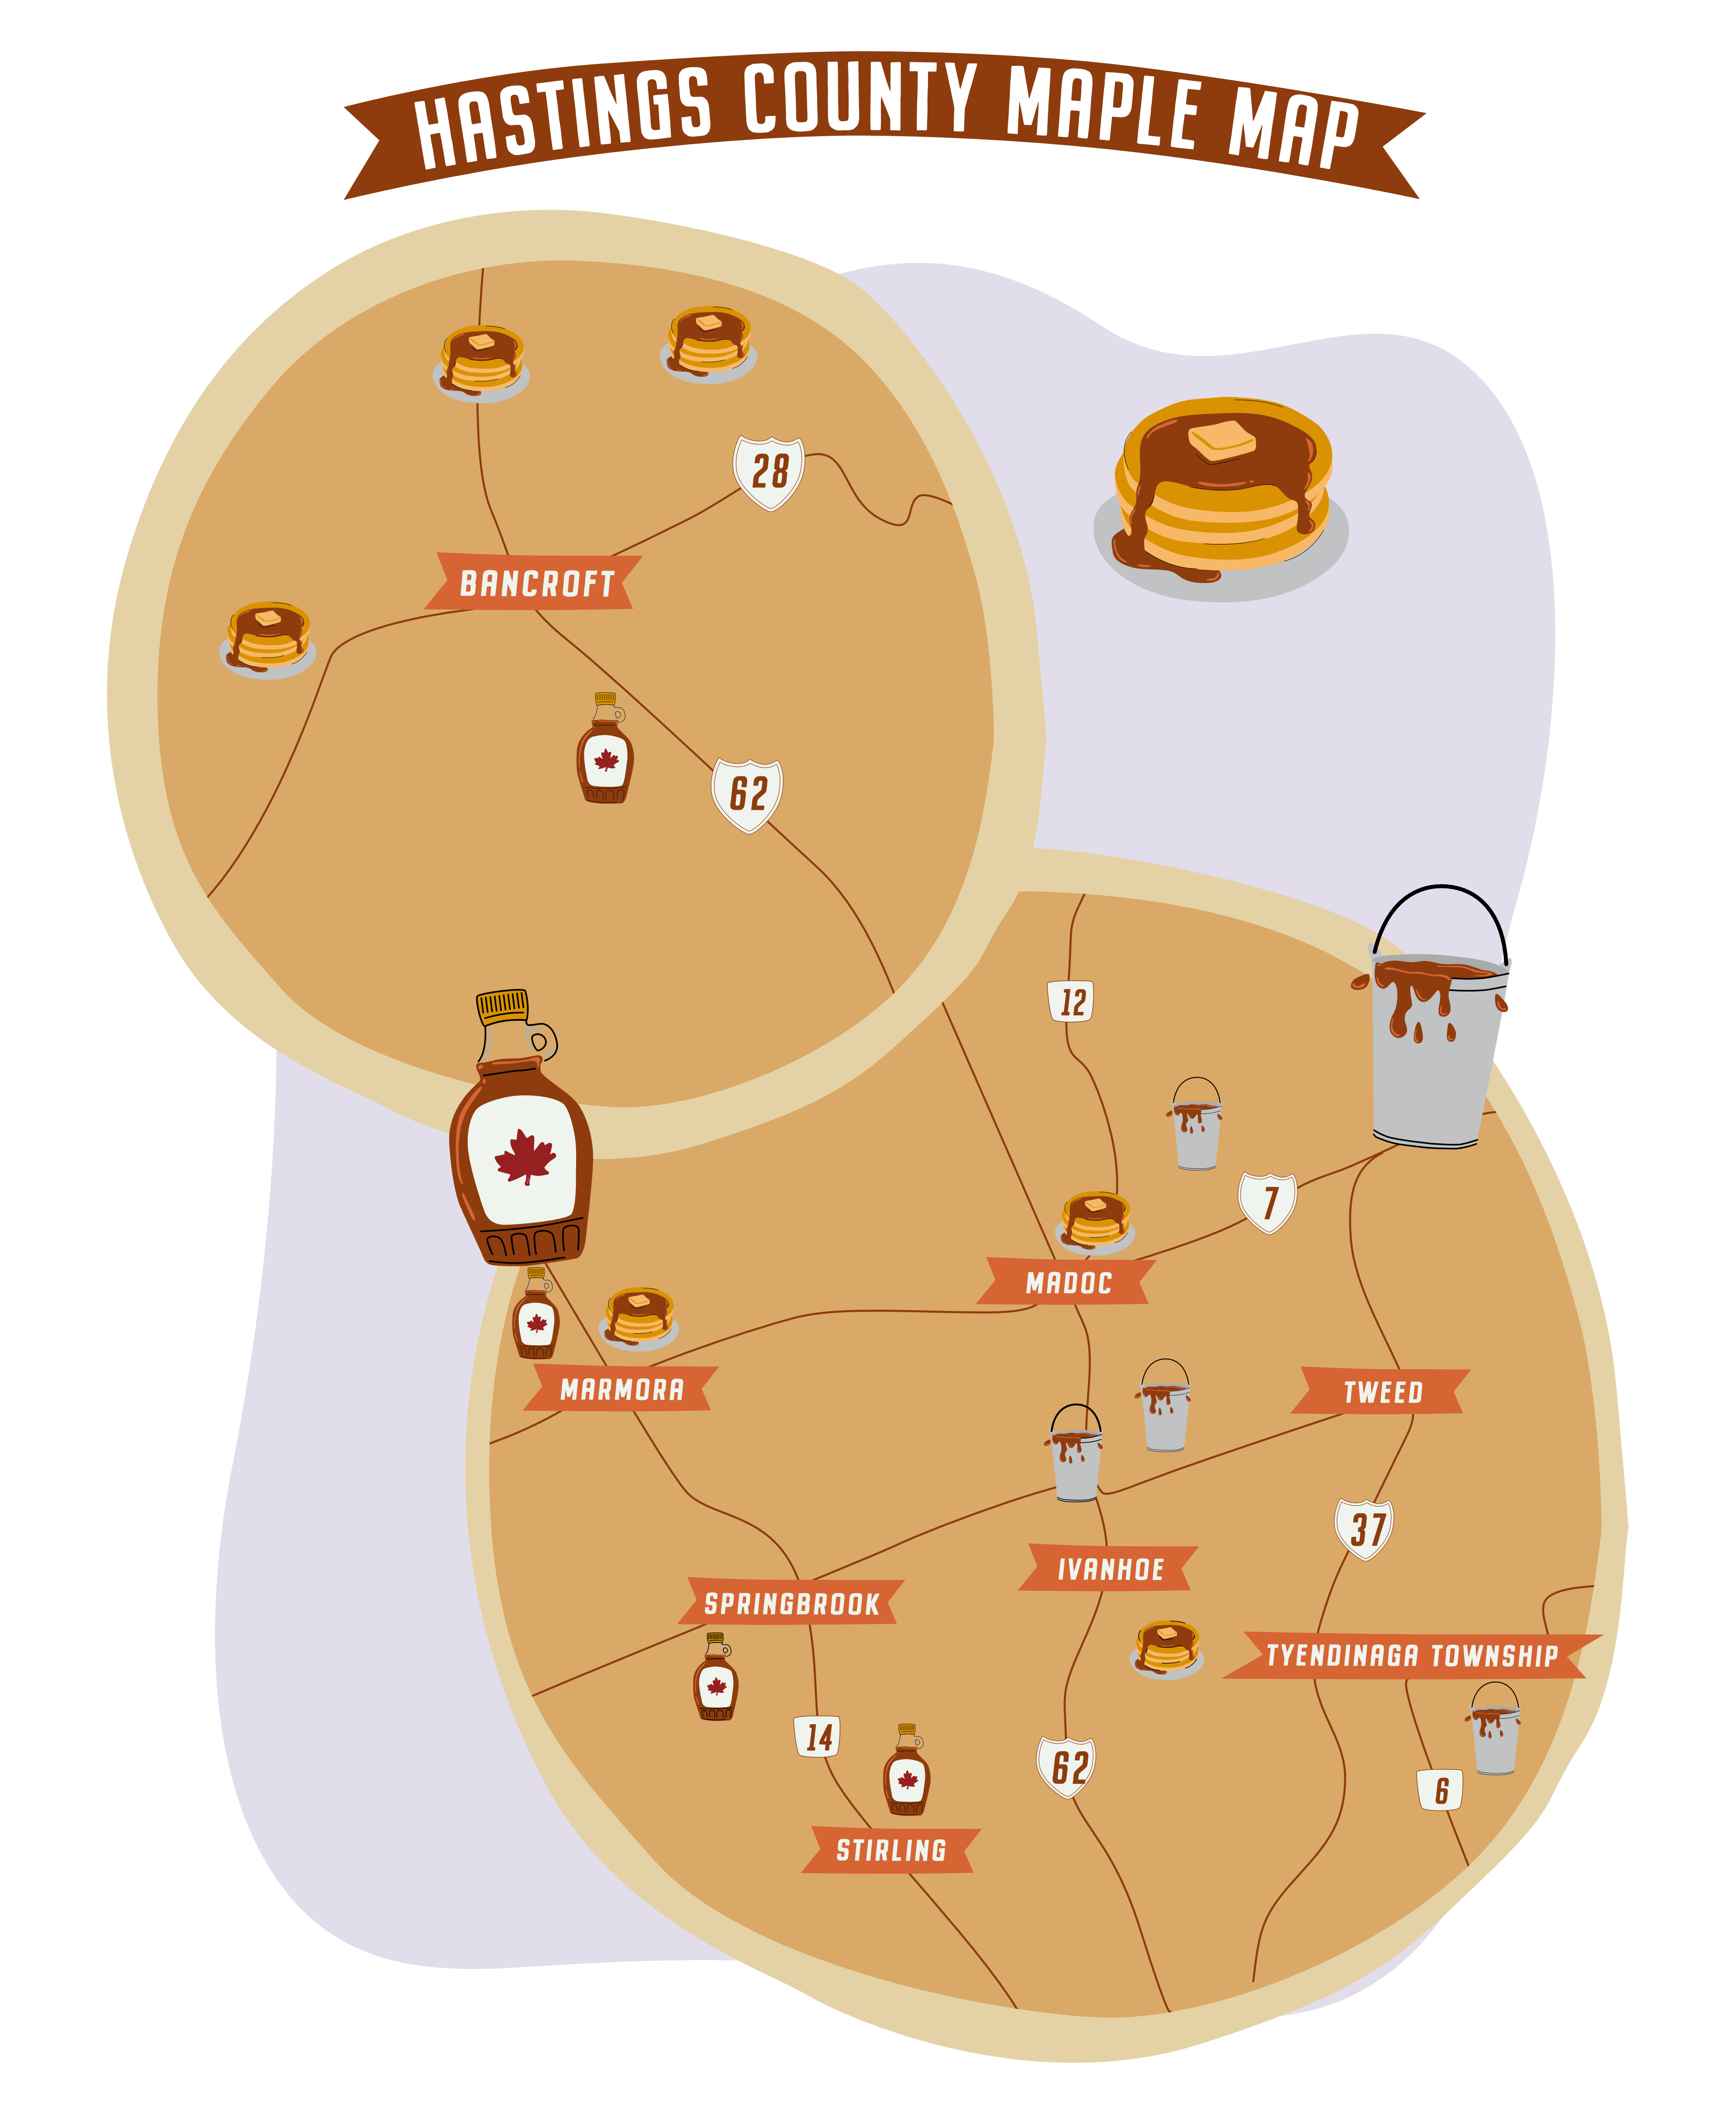 Fun design of a map in the shape of a pancake identifying all the Maple Locations in Hastings County for visitors